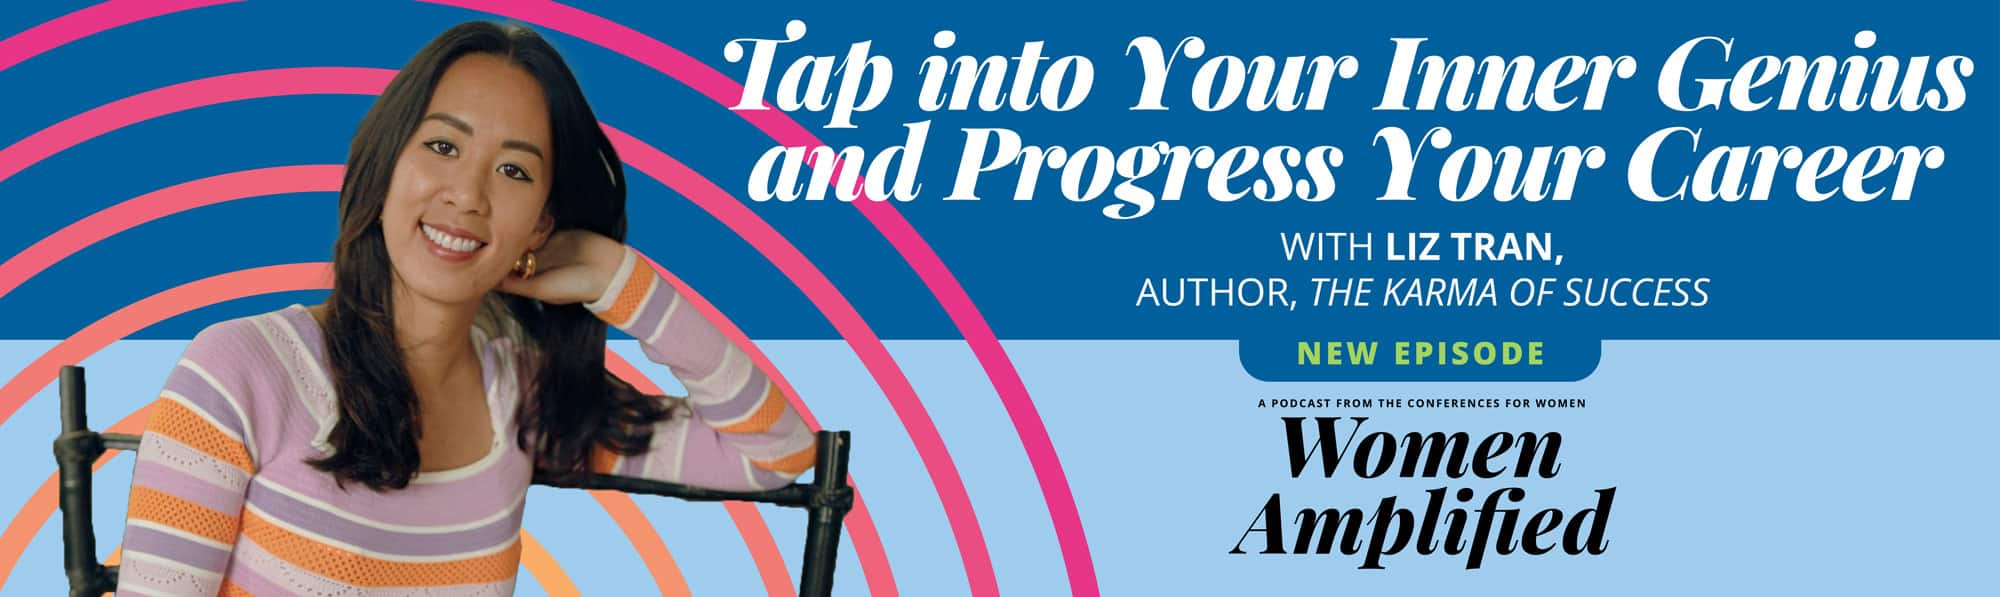 Tap into Your Inner Genius and Progress Your Career with Liz Tran | Women Amplified Podcast